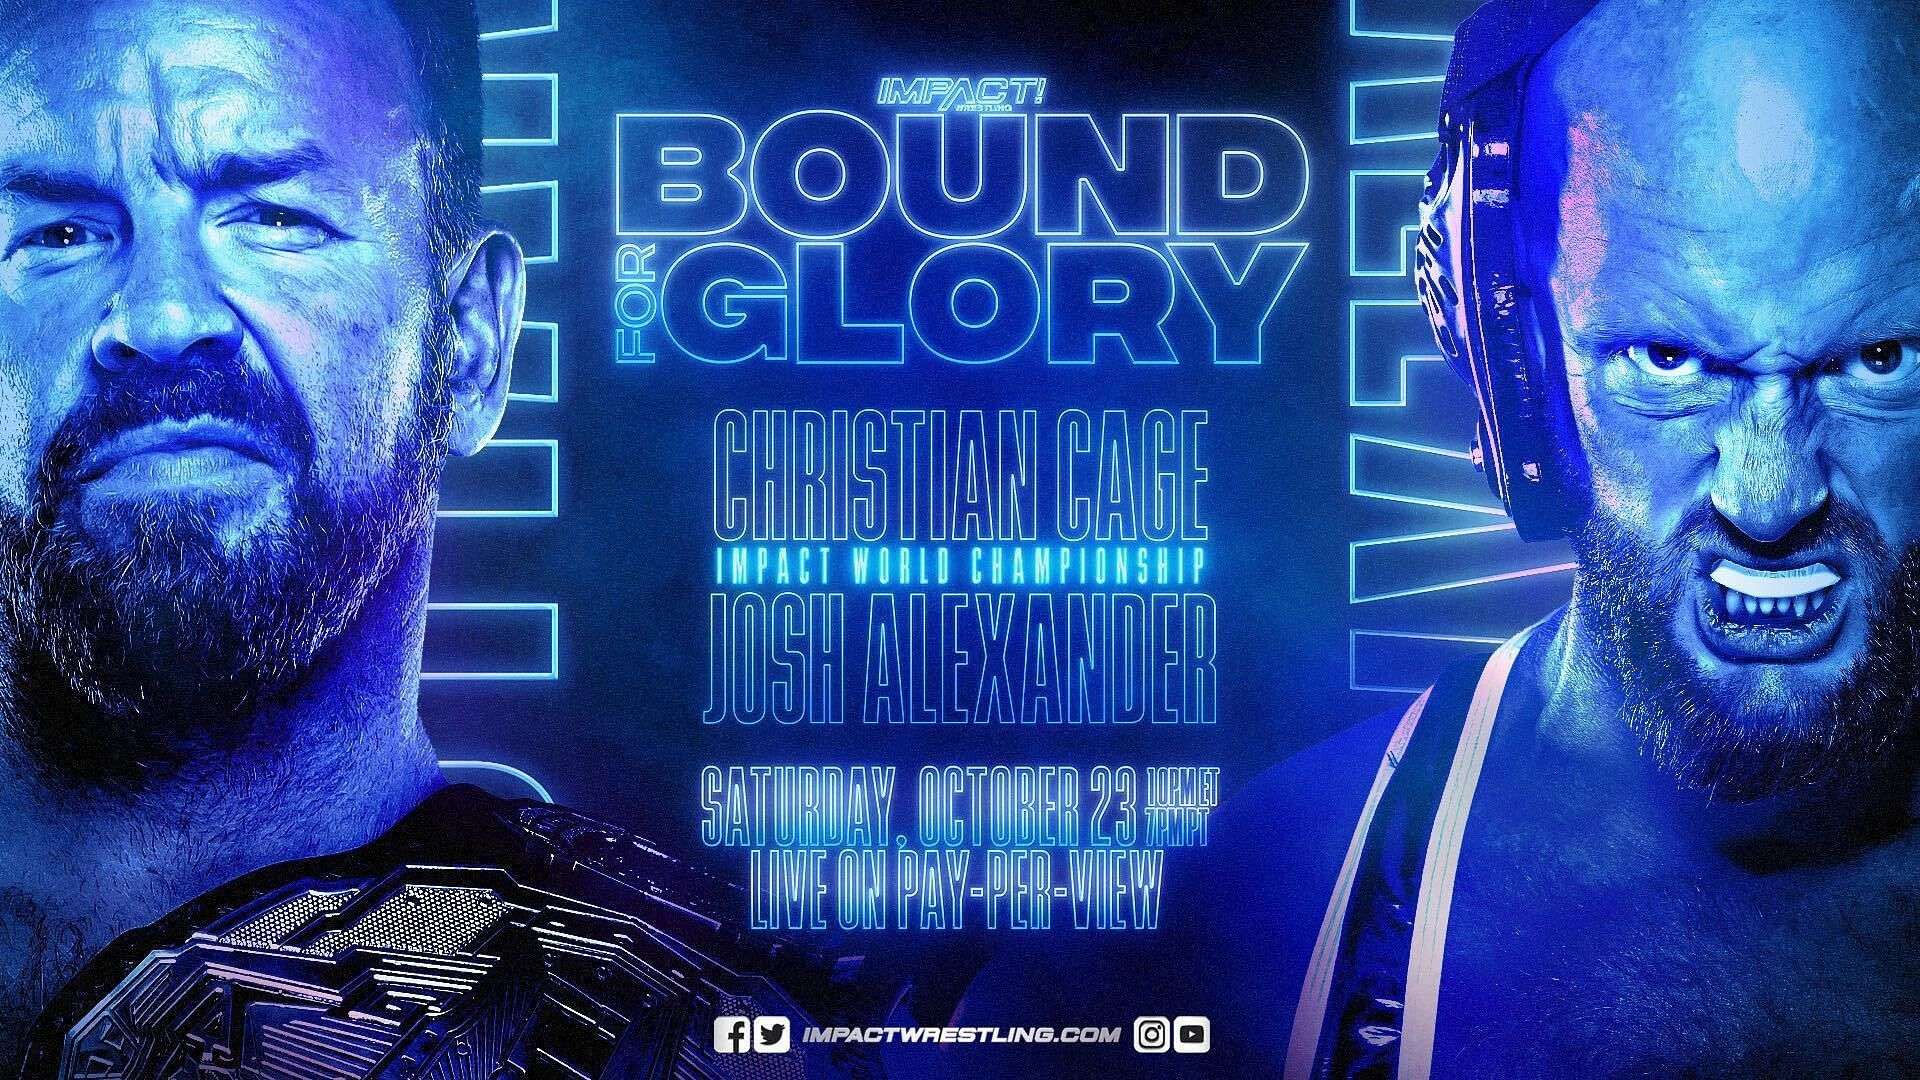 Watch IMPACT Wrestling Bound For Glory 2021 PPV Full Show Online Free